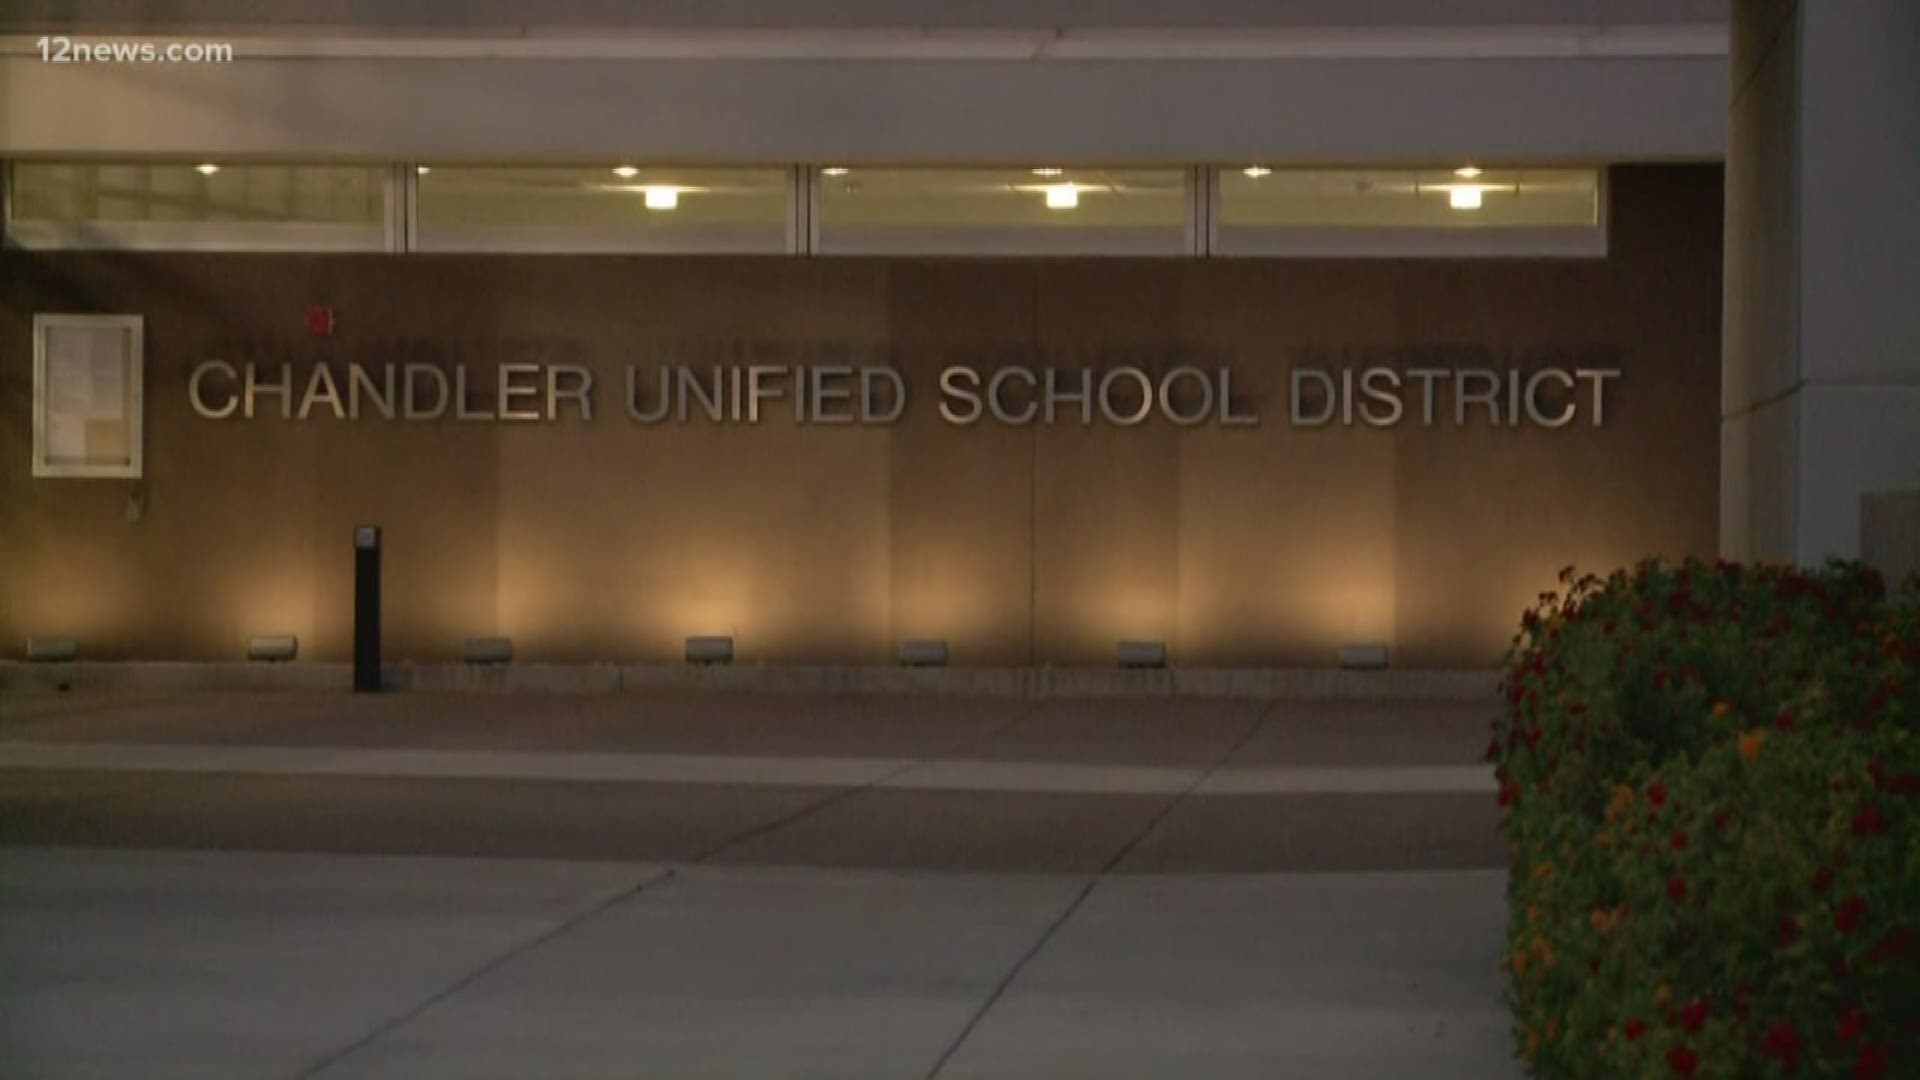 A Chandler Unified School District official says the decision to drop the classes came because they are listening to the community. Parents say they want it taught.